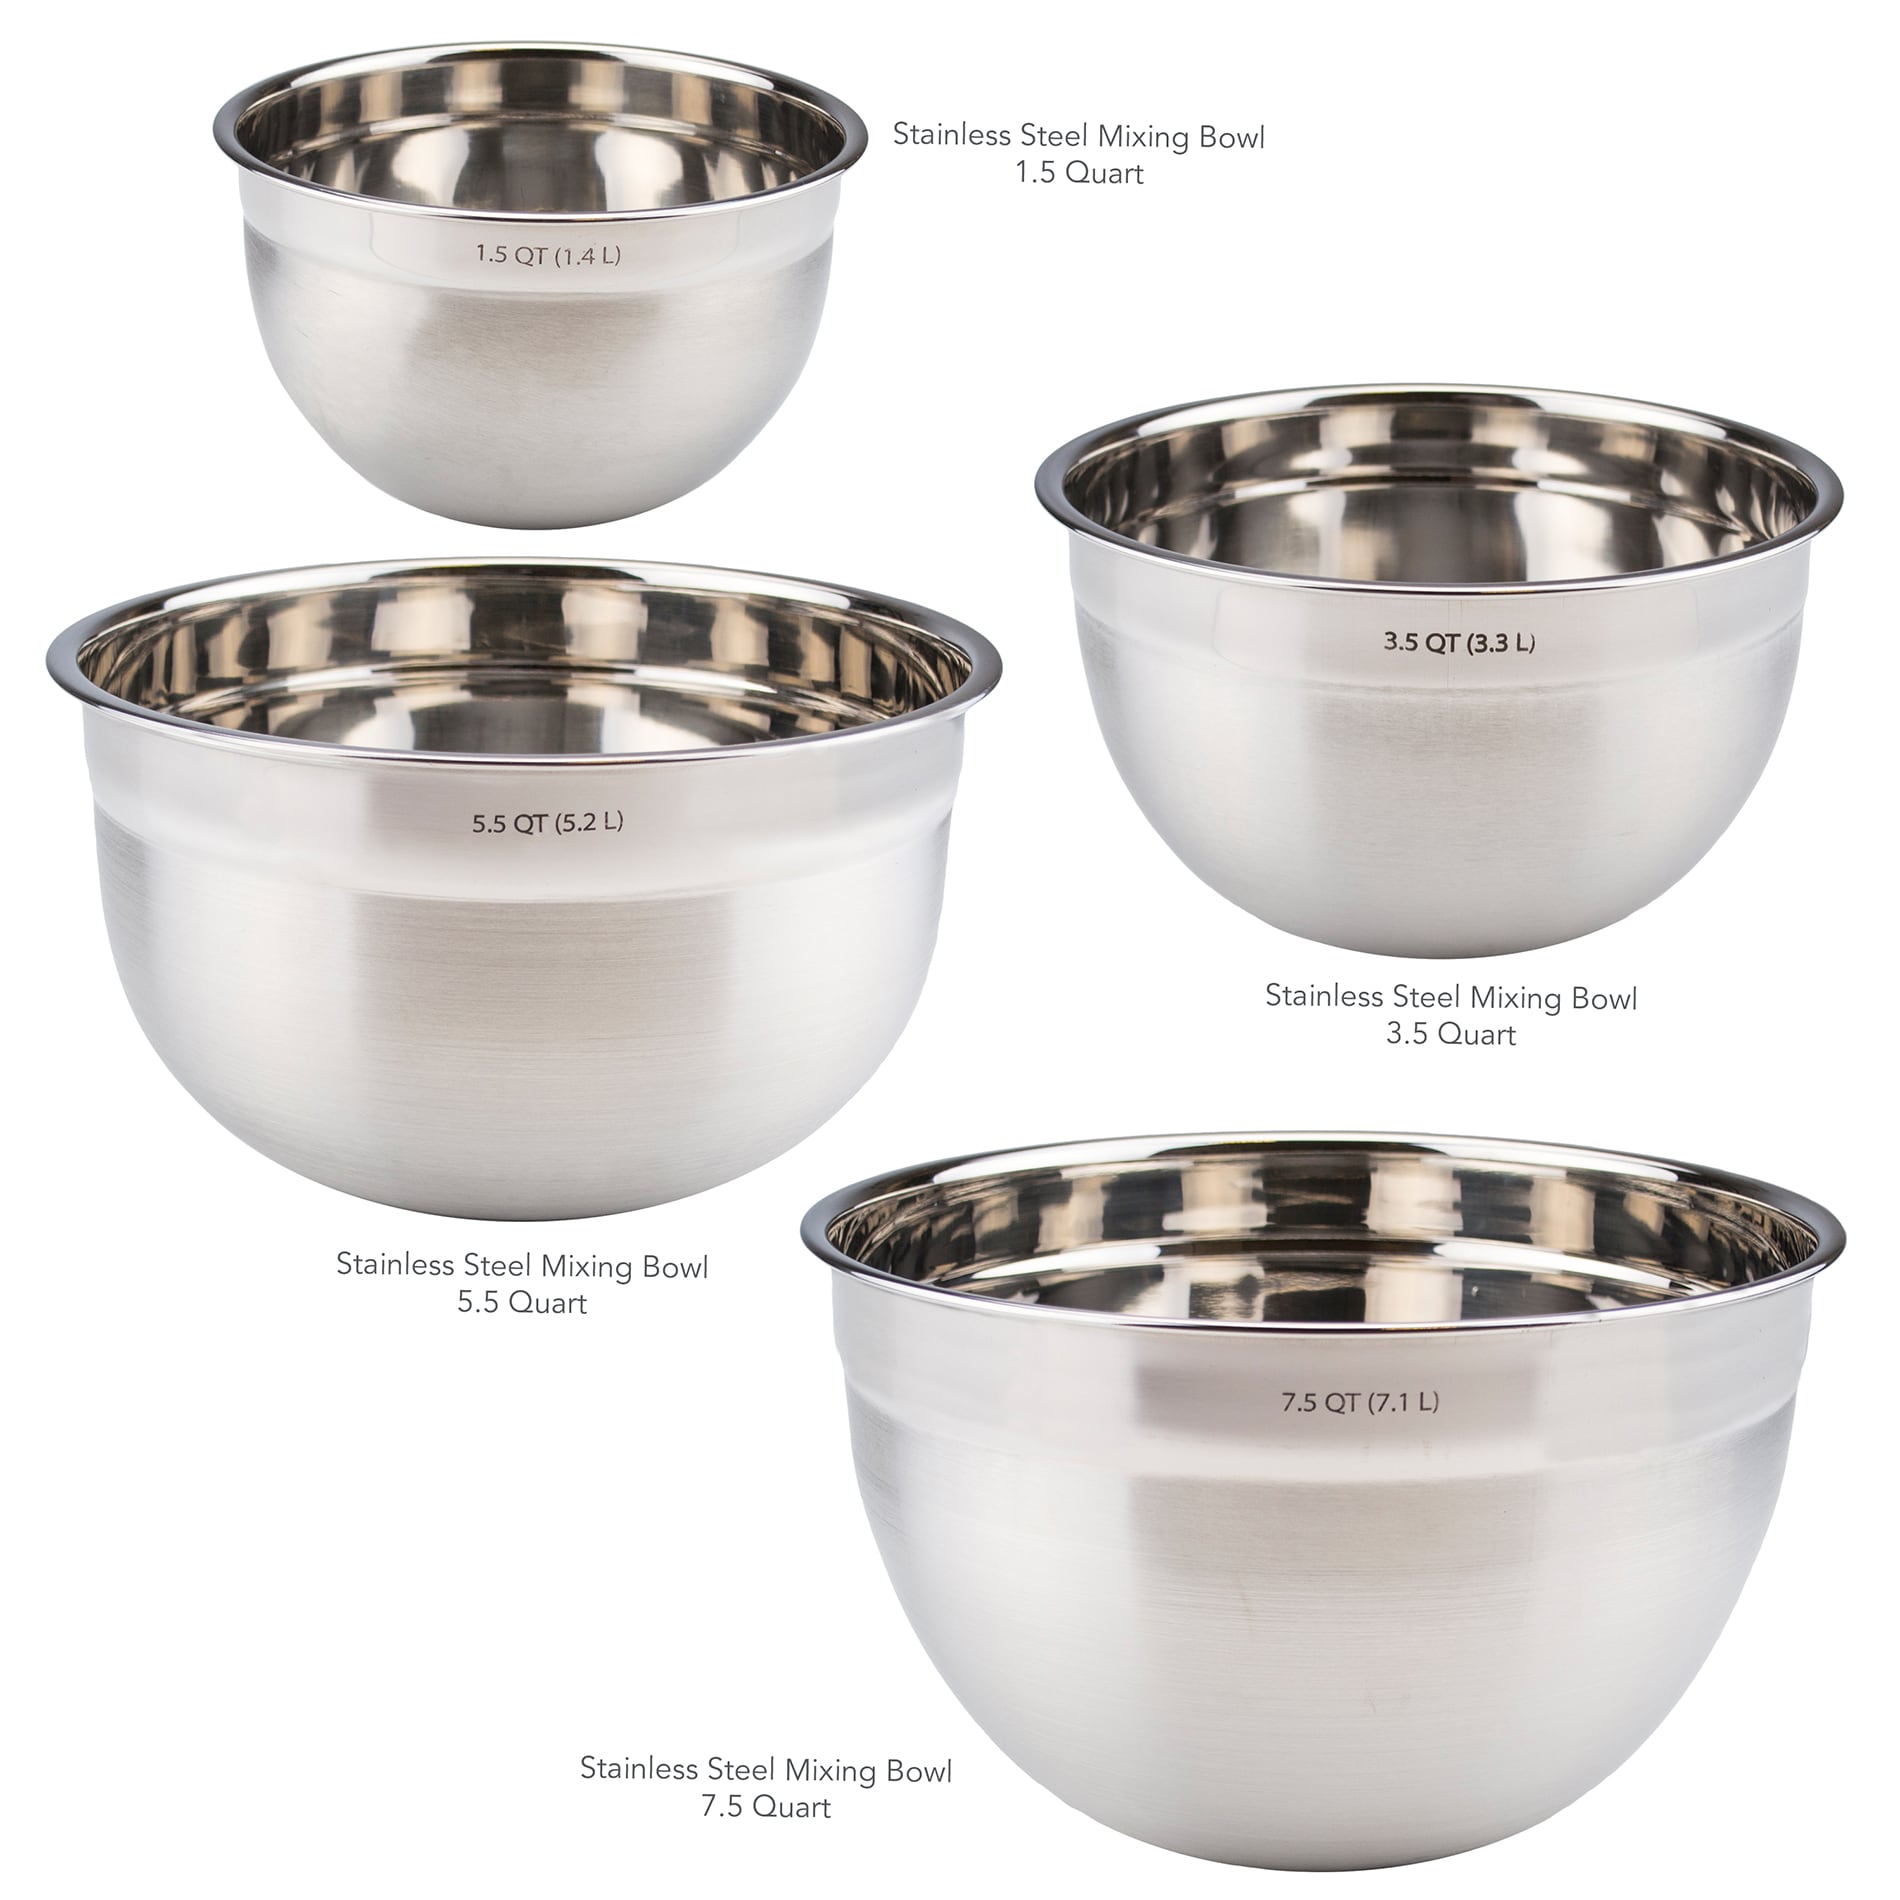 Alegacy 700 Series Stainless Steel Mixing Bowl, 13 Quart Capacity.